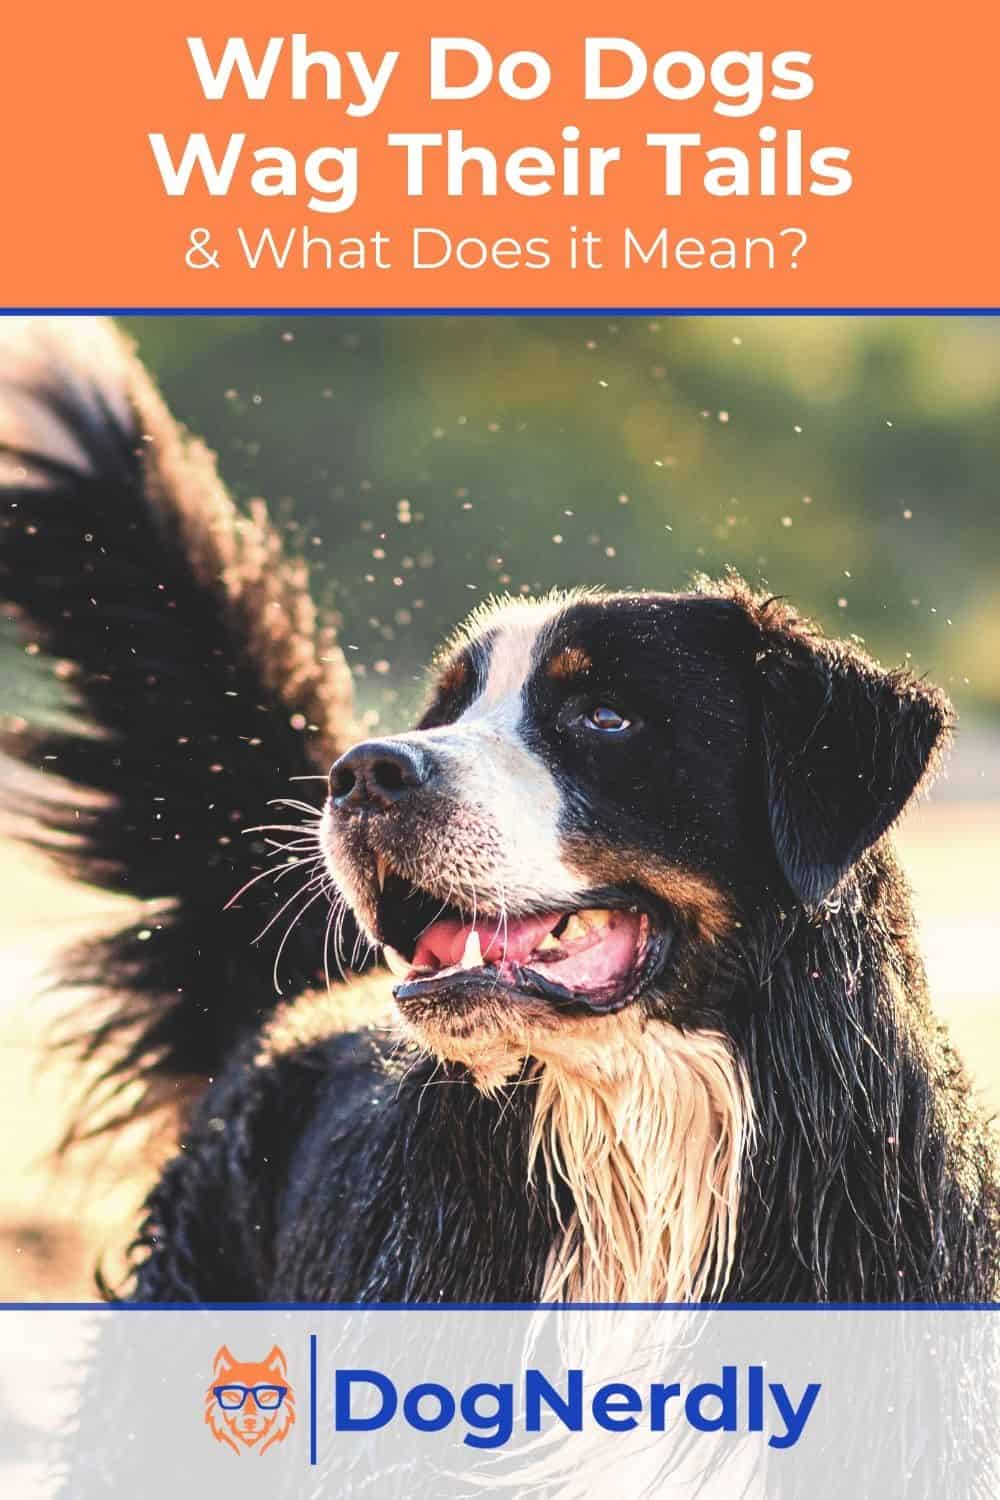 Why do dogs wag their tails & what does it mean?